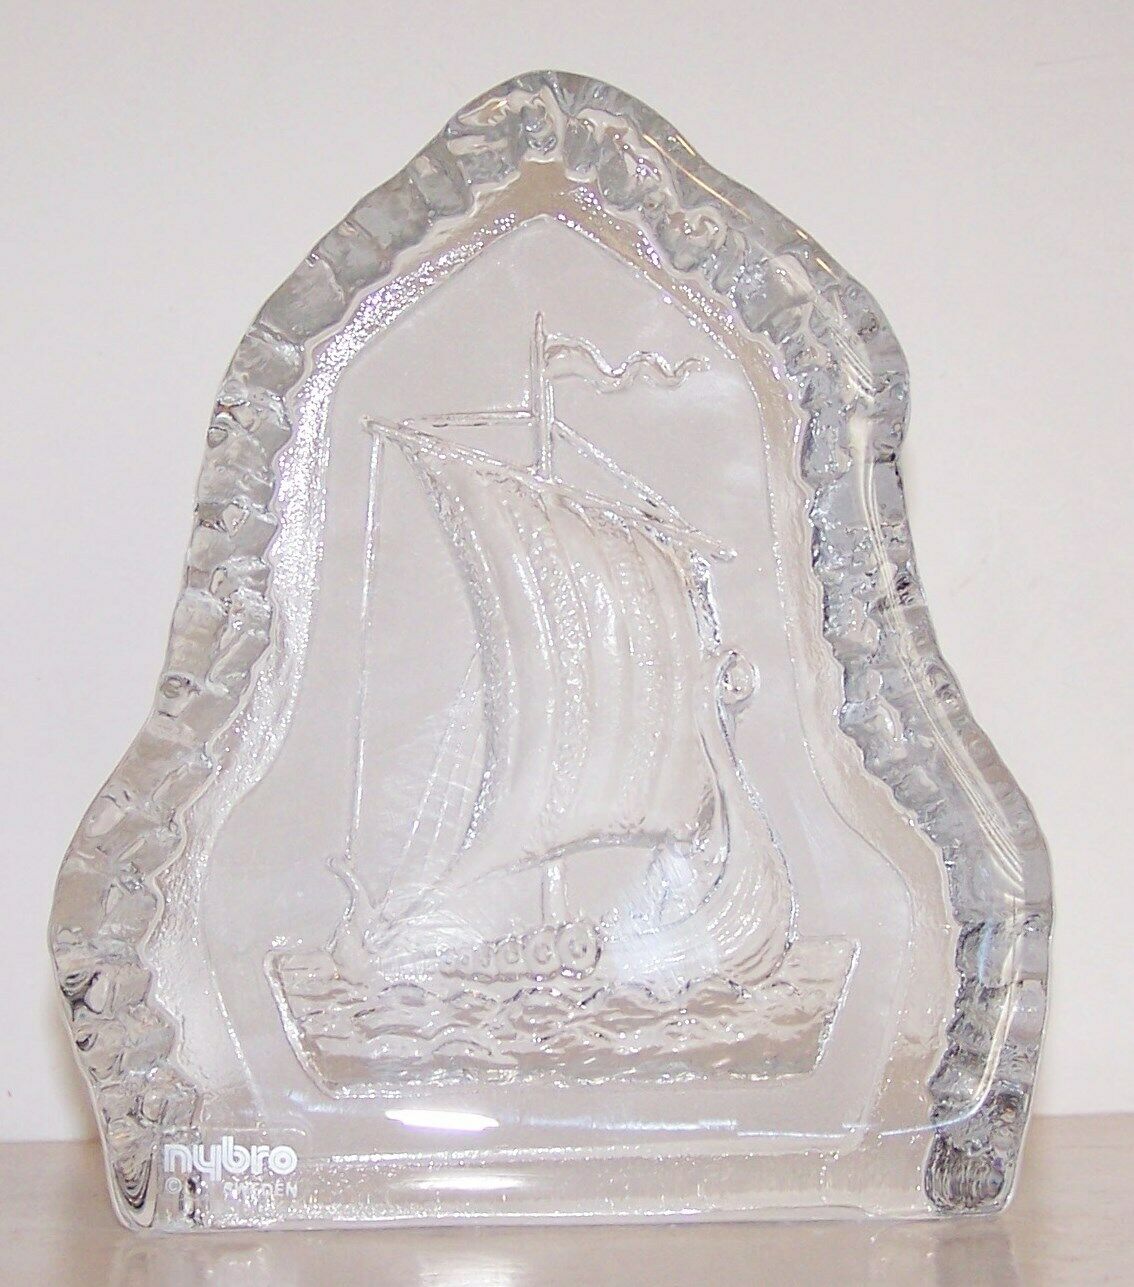 Nybro Sweden Crystal Viking Ship Art Glass 6" Sculpture/paperweight With Label